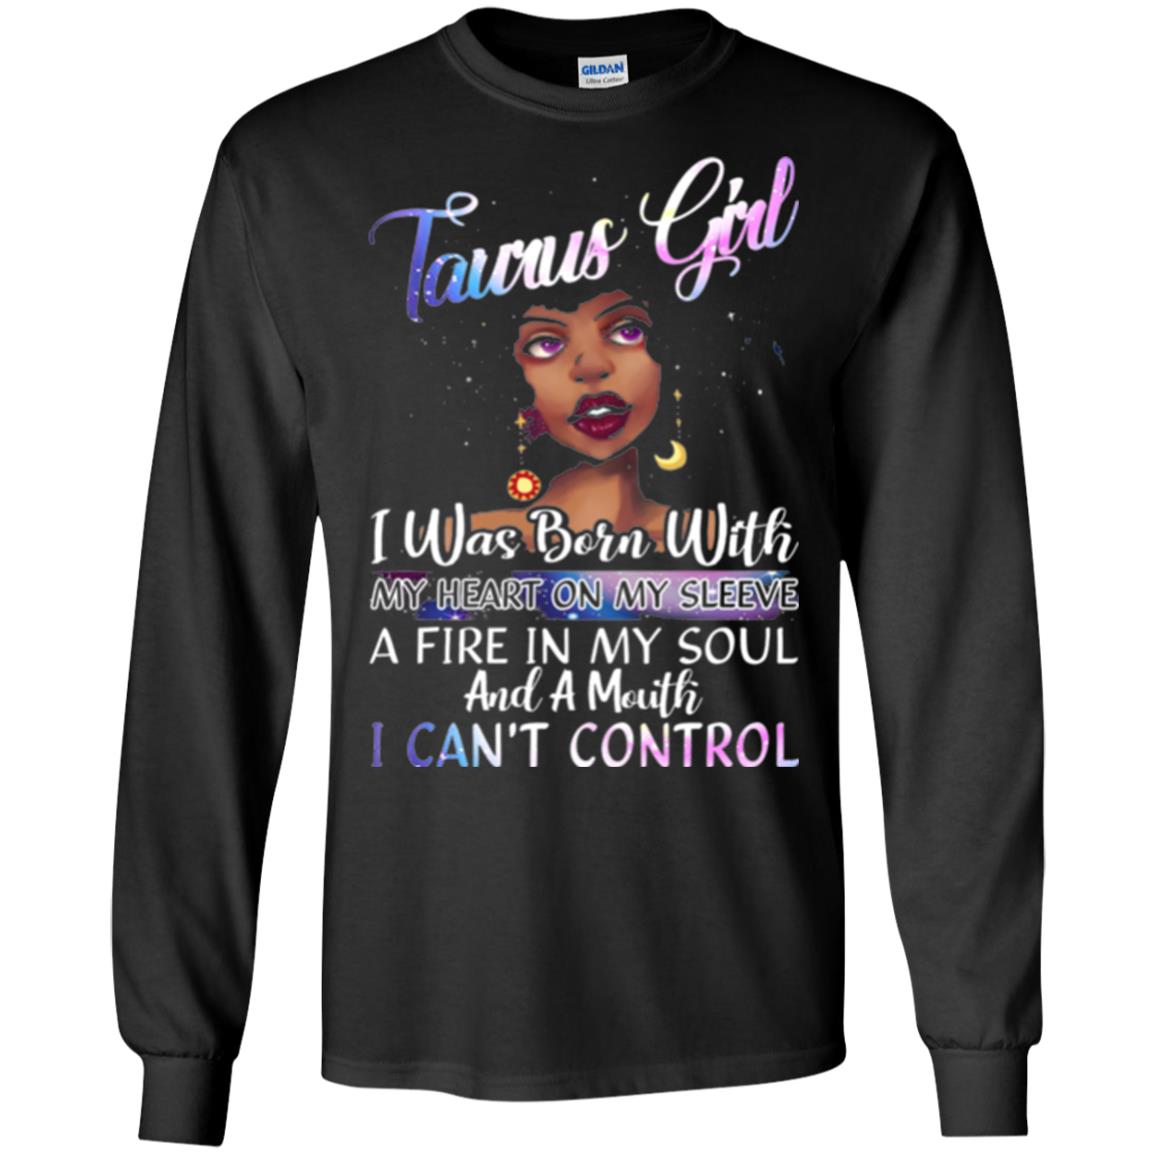 Taurus Girl Shirt I Was Born With My Heart On My Sleeve A Fire In My Soul